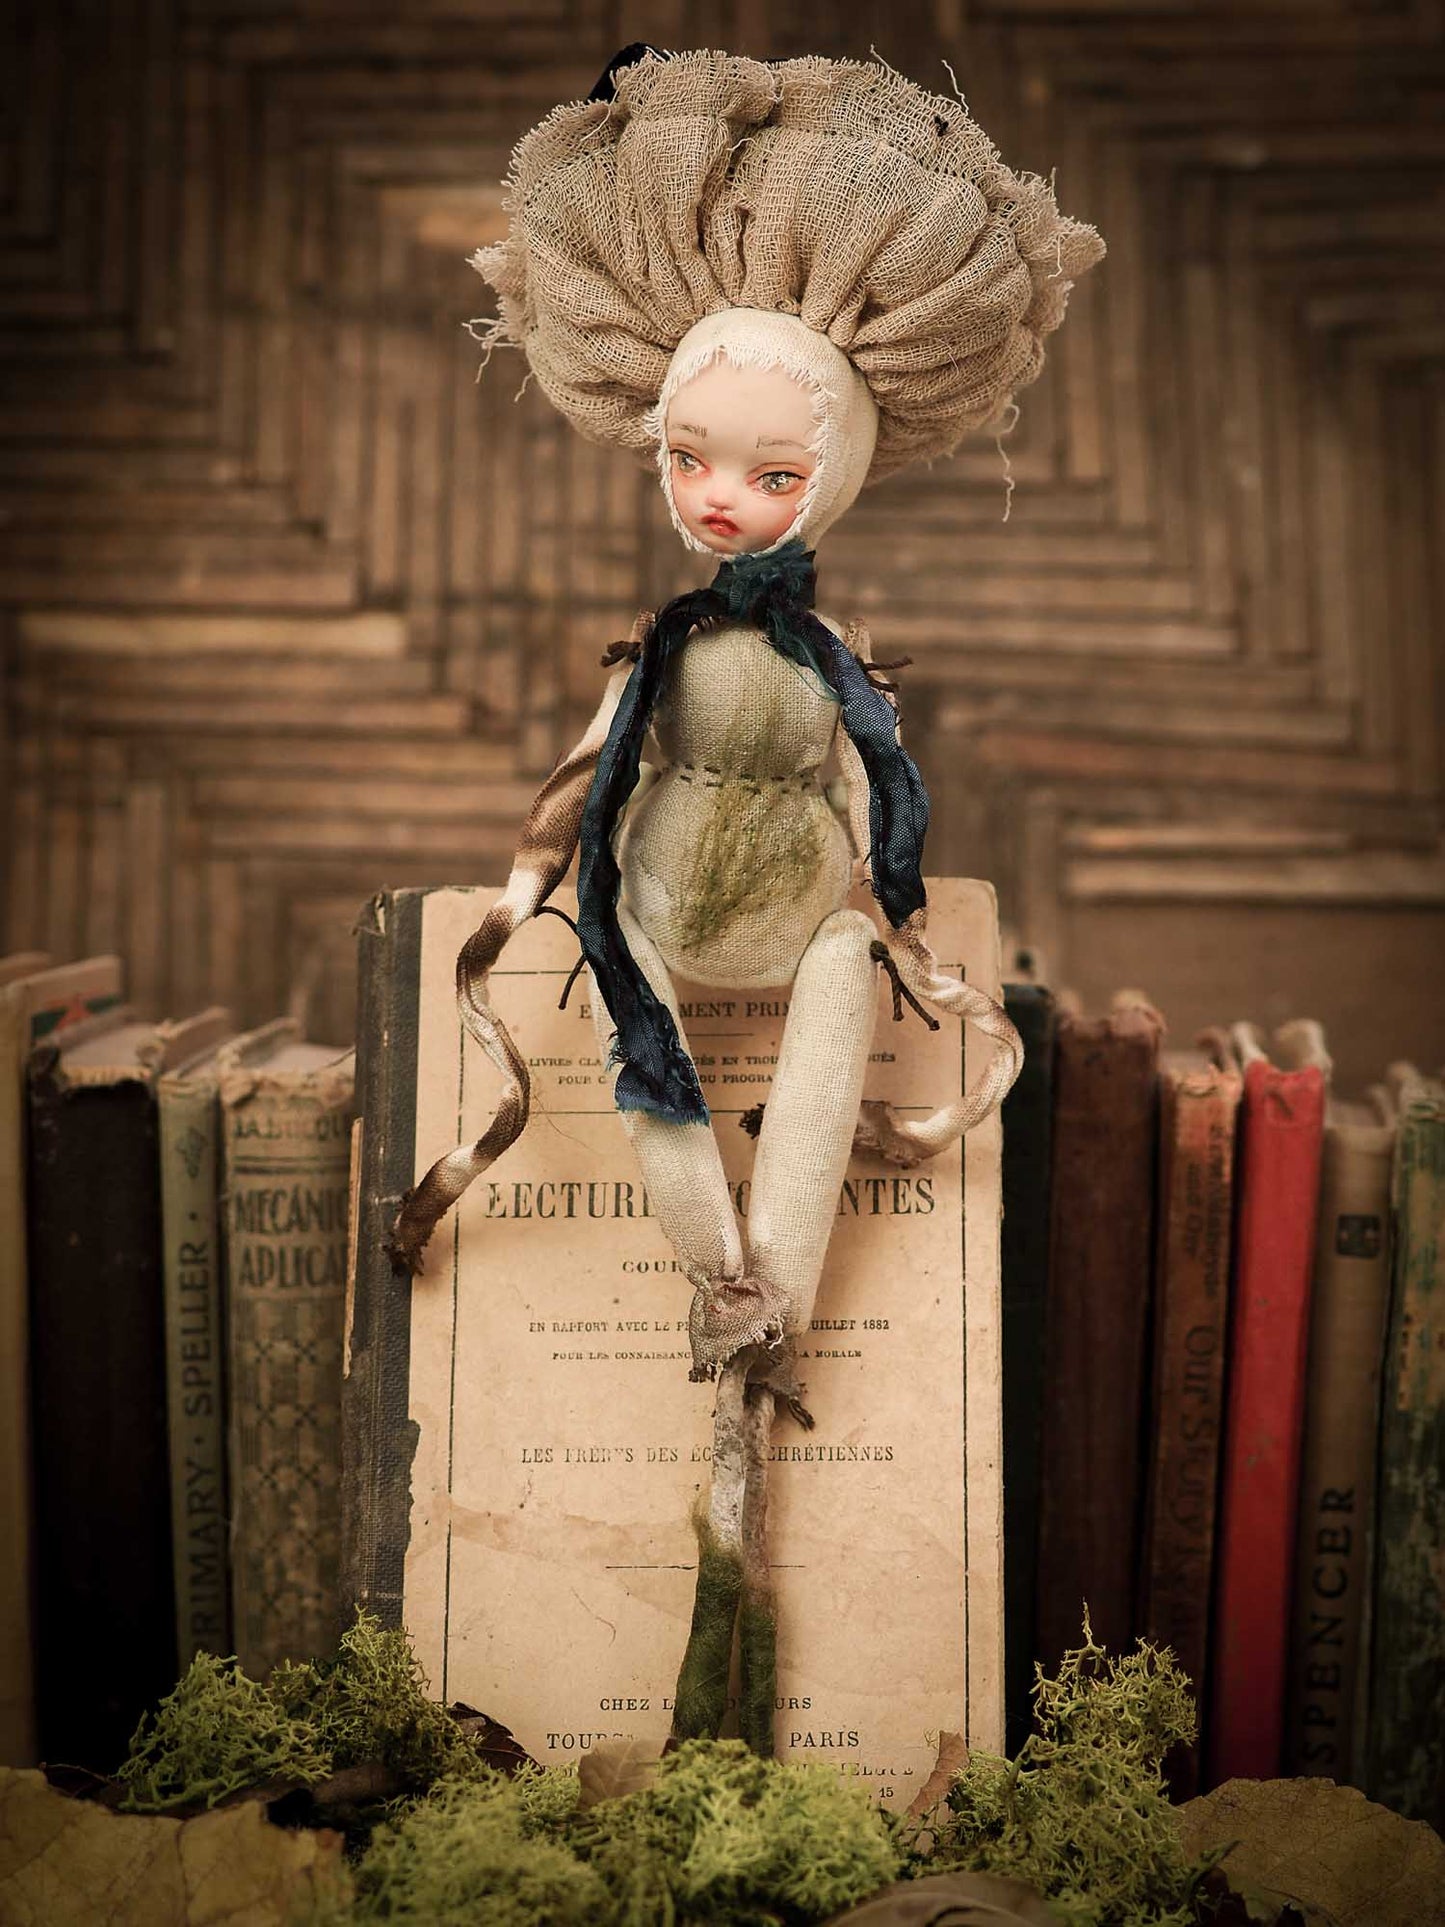 An original forest fairy mushroom fungi toadstool girl art doll handmade by Danita Art, using with original patterns, organic fabric dyed using only natural ingredients like avocado peels, walnuts and marigolds. Each mini art doll in this toy collection is a mini work of huggable fabric art that will be treasured by any collector of Danita's melancholic and fantastic work.